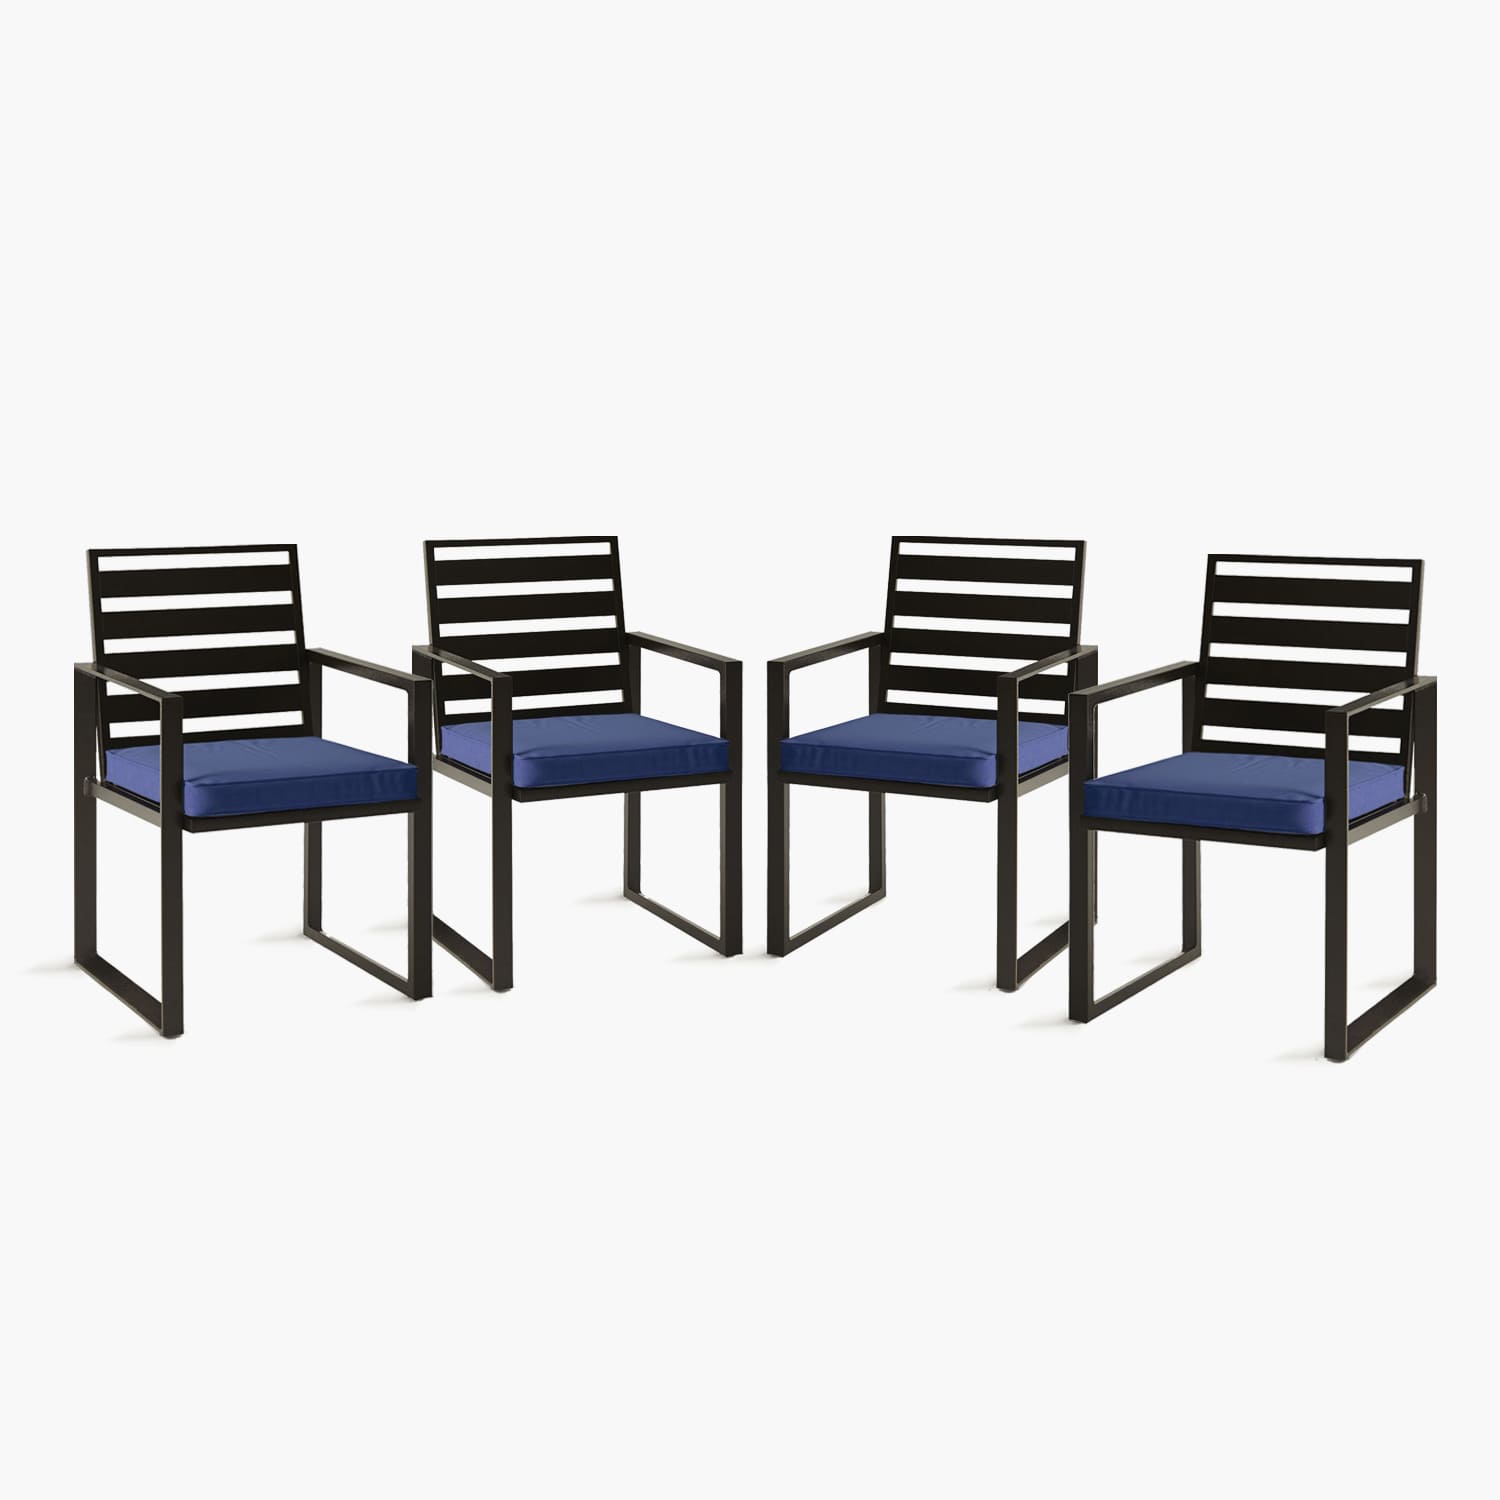 patio dining chairoutdoor dining chair, patio metal chairs. outdoor dining outdoor dinner, set of 4